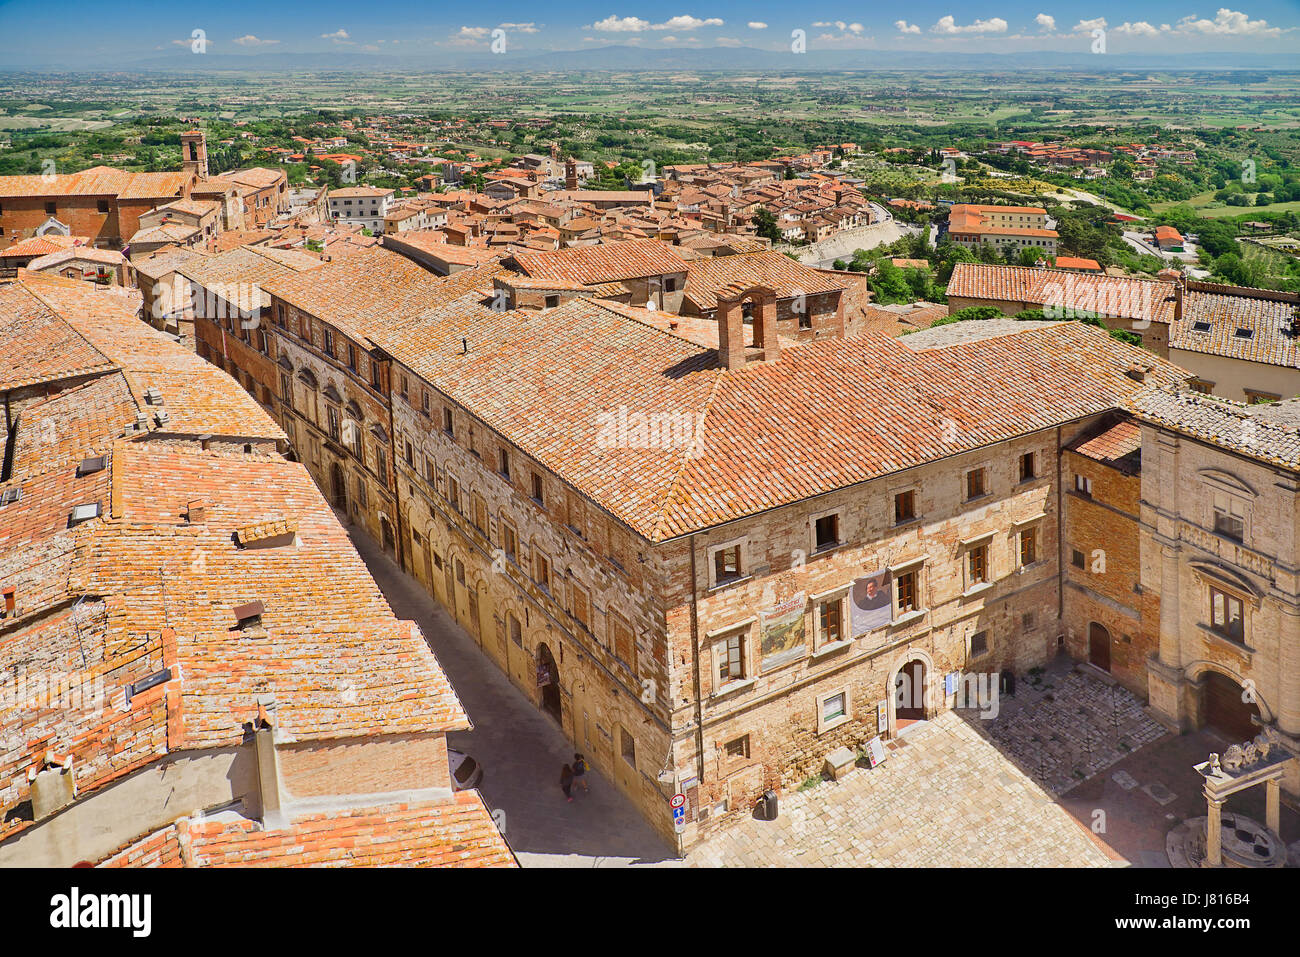 Italy, Tuscany, Montepulciano, View over the rooftops of the town towards distant hills from the tower of Palazzo Comunale or Town Hall. Stock Photo